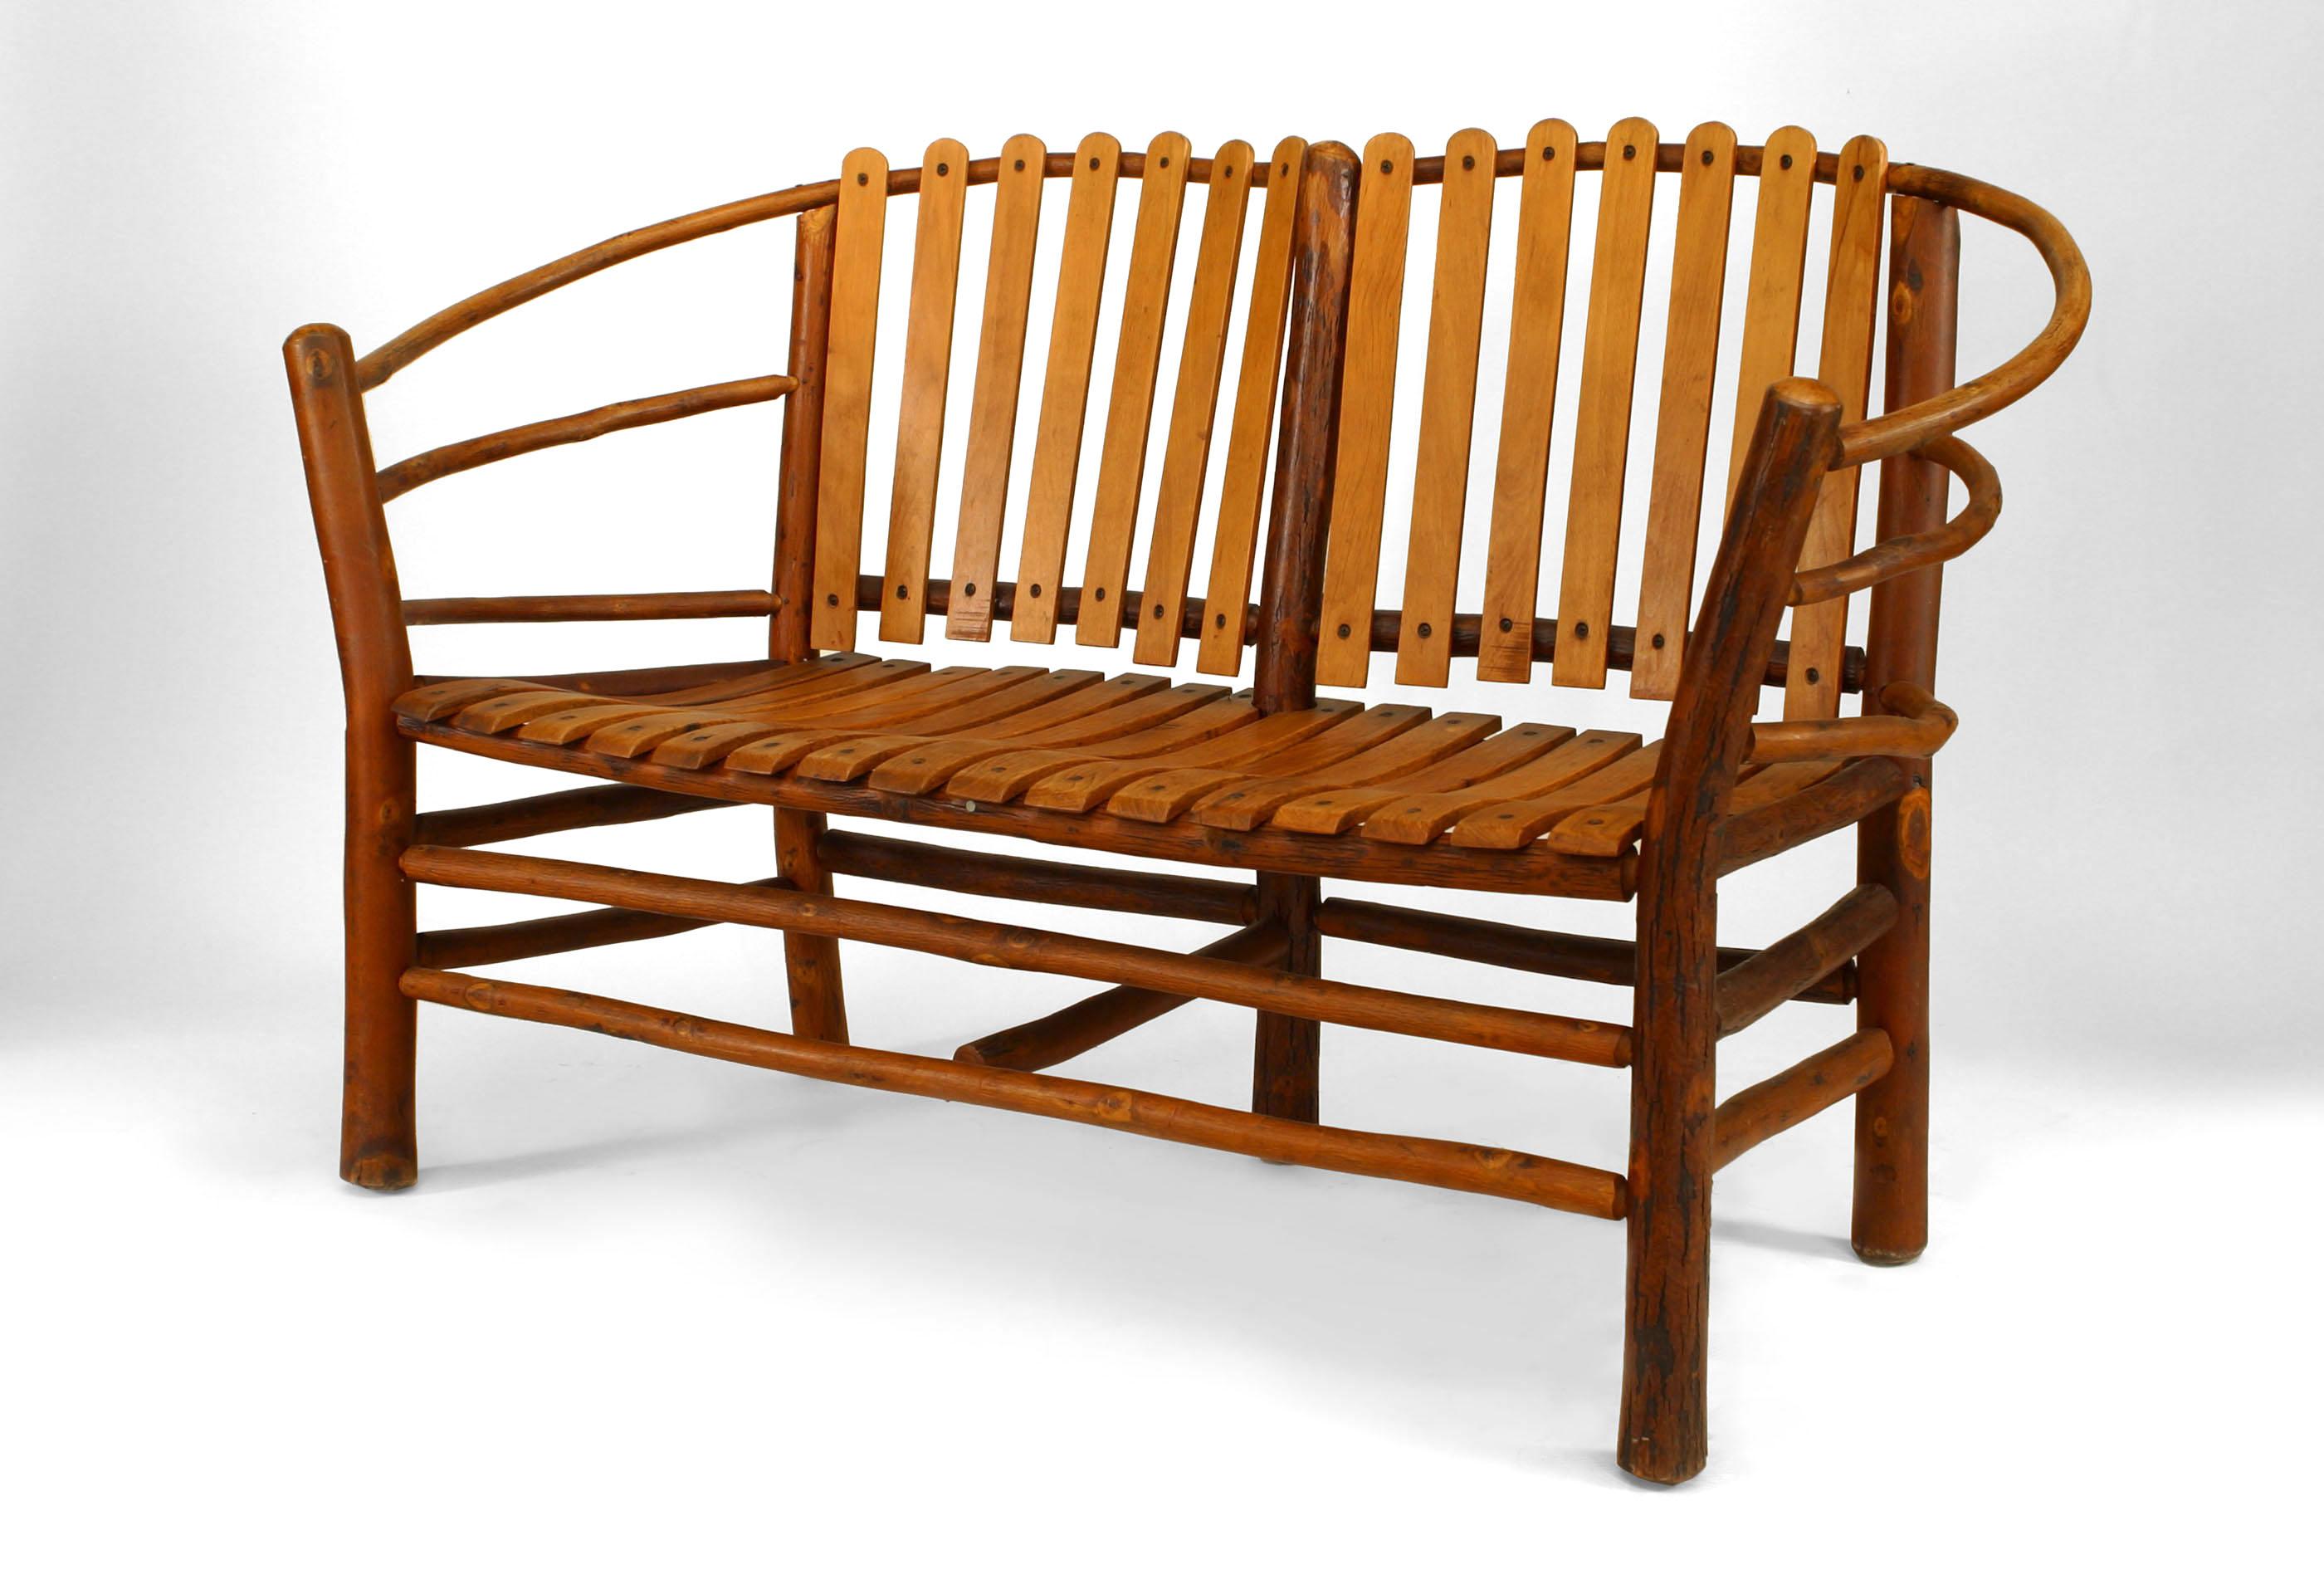 Bearing the brand of the Old Hickory Company of Martinsville, Indiana, this rustic loveseat is composed of oak with slat design seats, bowed arms, and a parallel bar stretcher joining four legs.